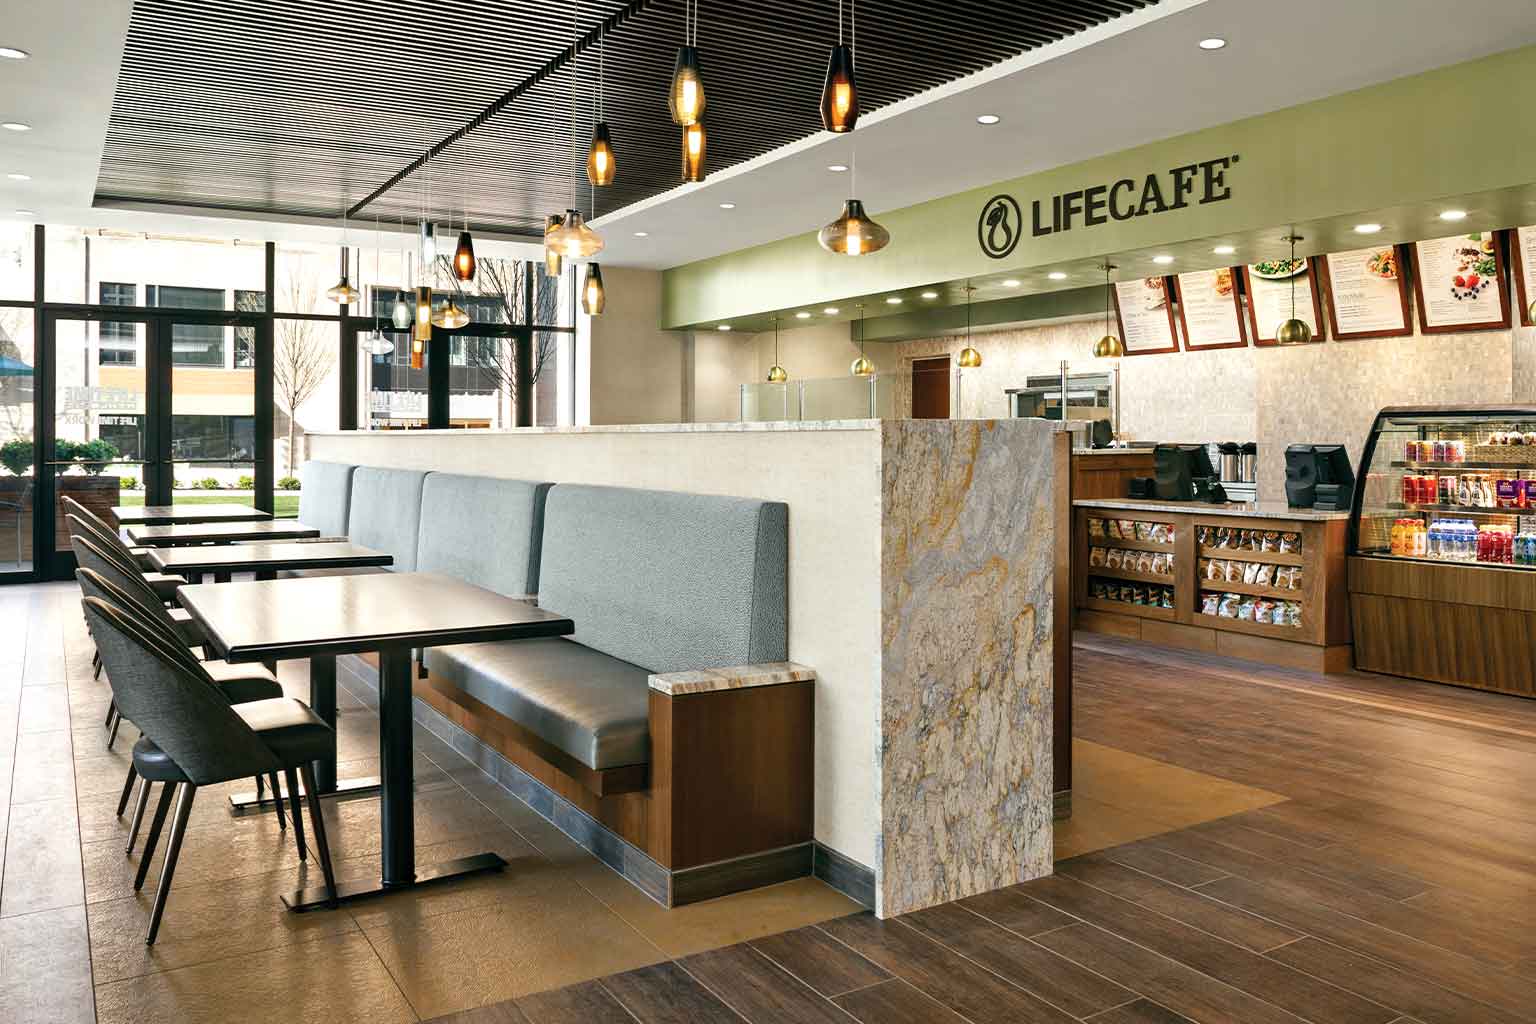 Booth seating and ordering counter at a Life Cafe